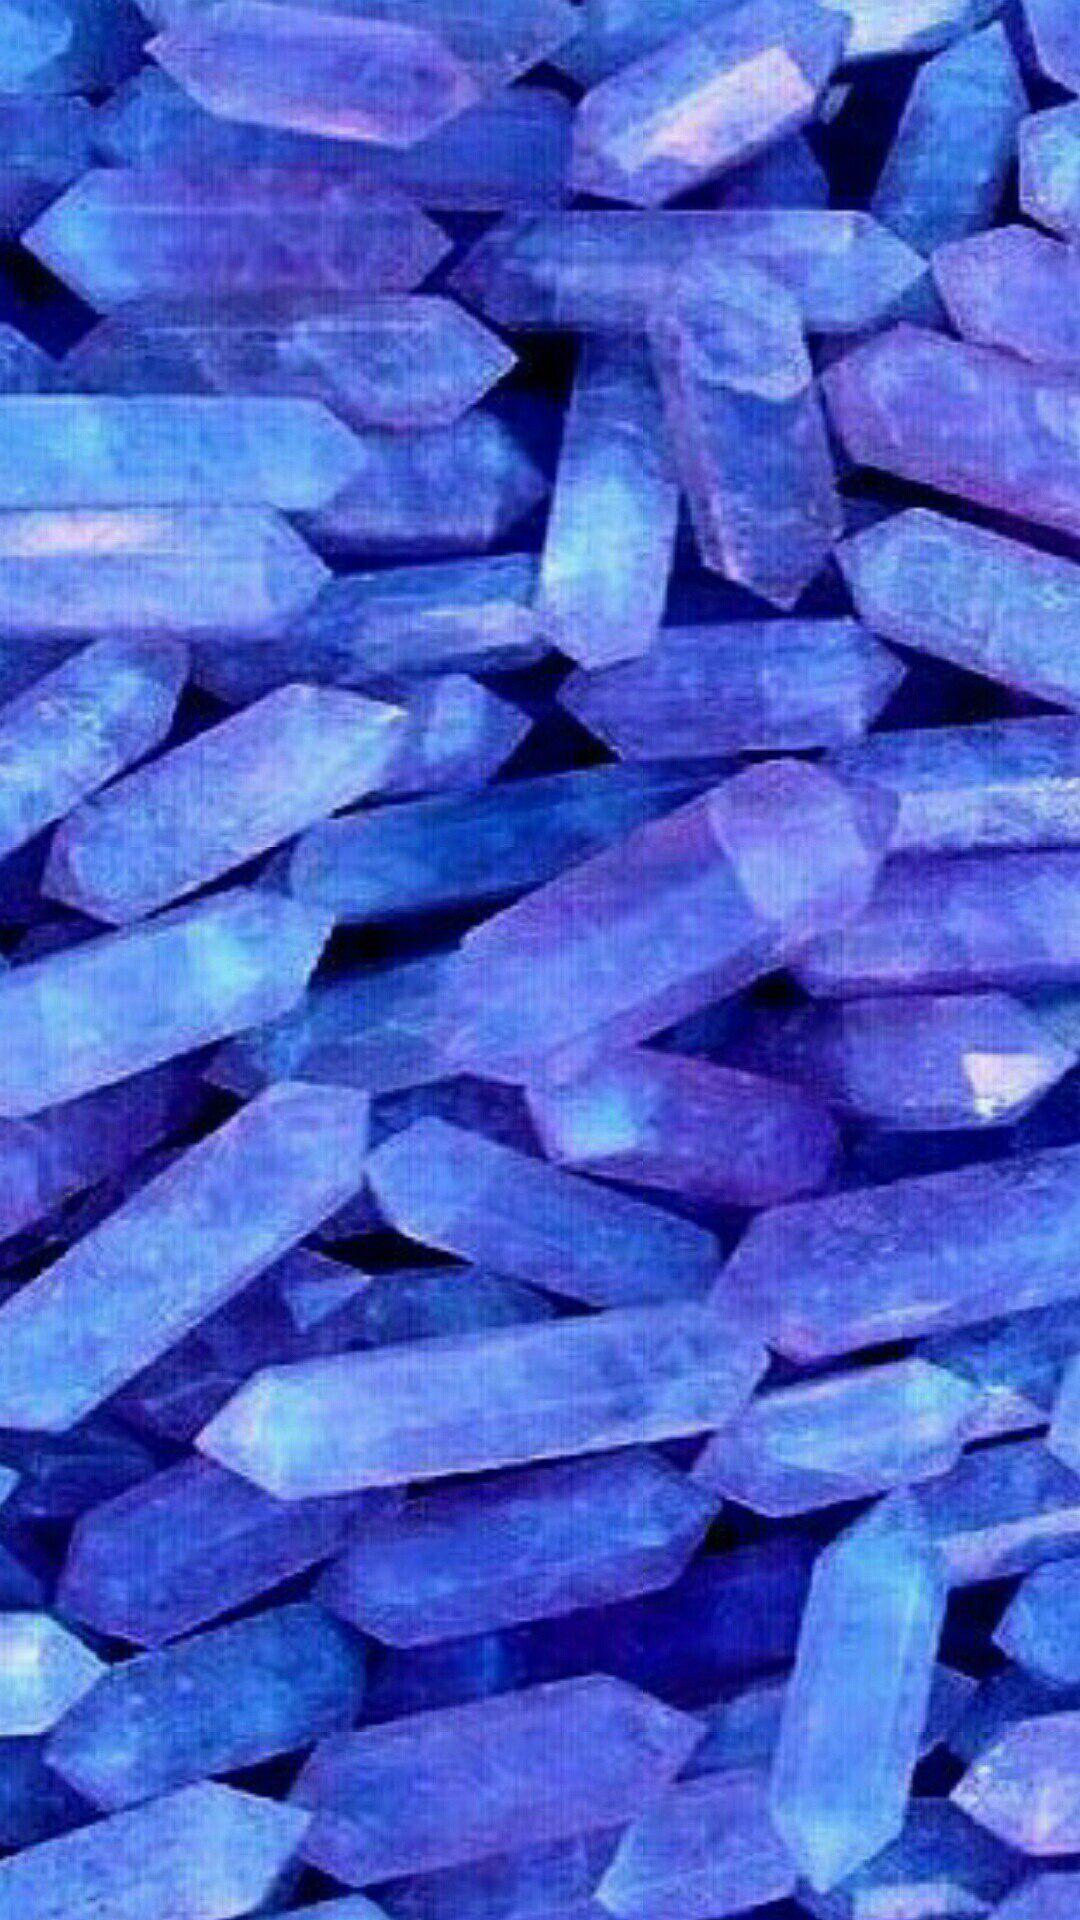 Purple Neon Crystal Stone Wallpapers - Wallpaper Cave